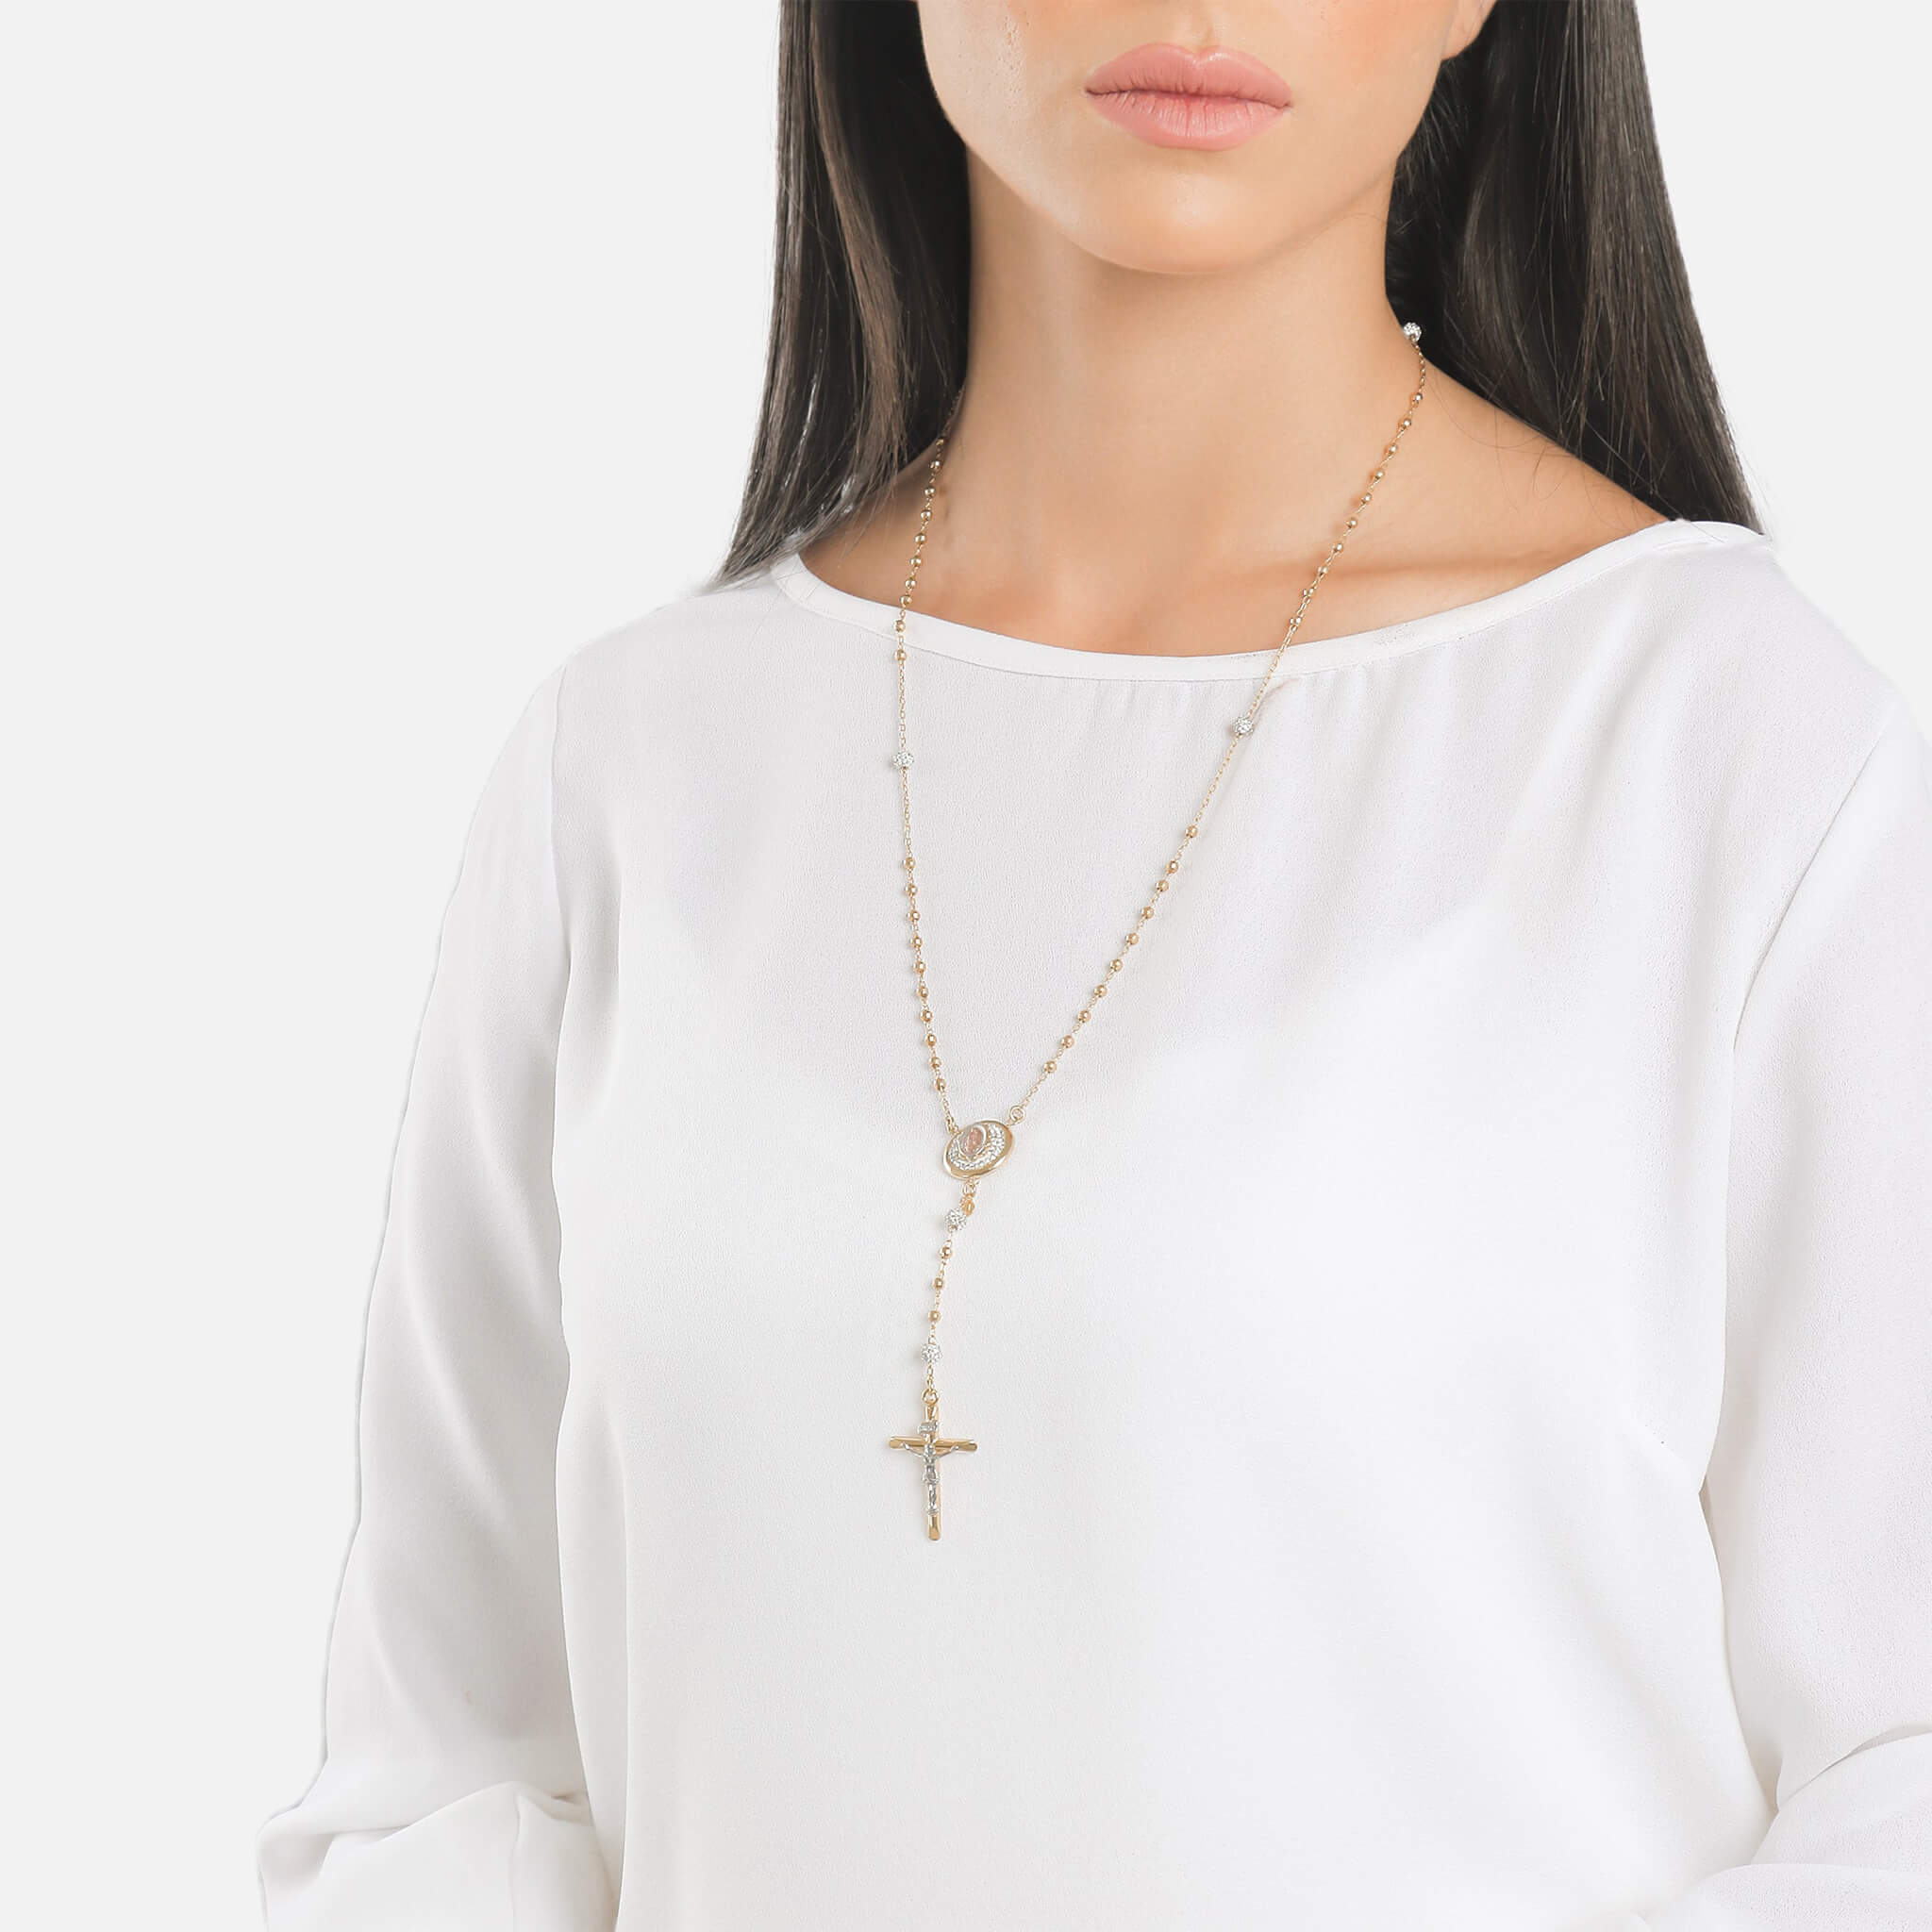 The Carmel Radiant Rosary Necklace - DressbarnNecklaces